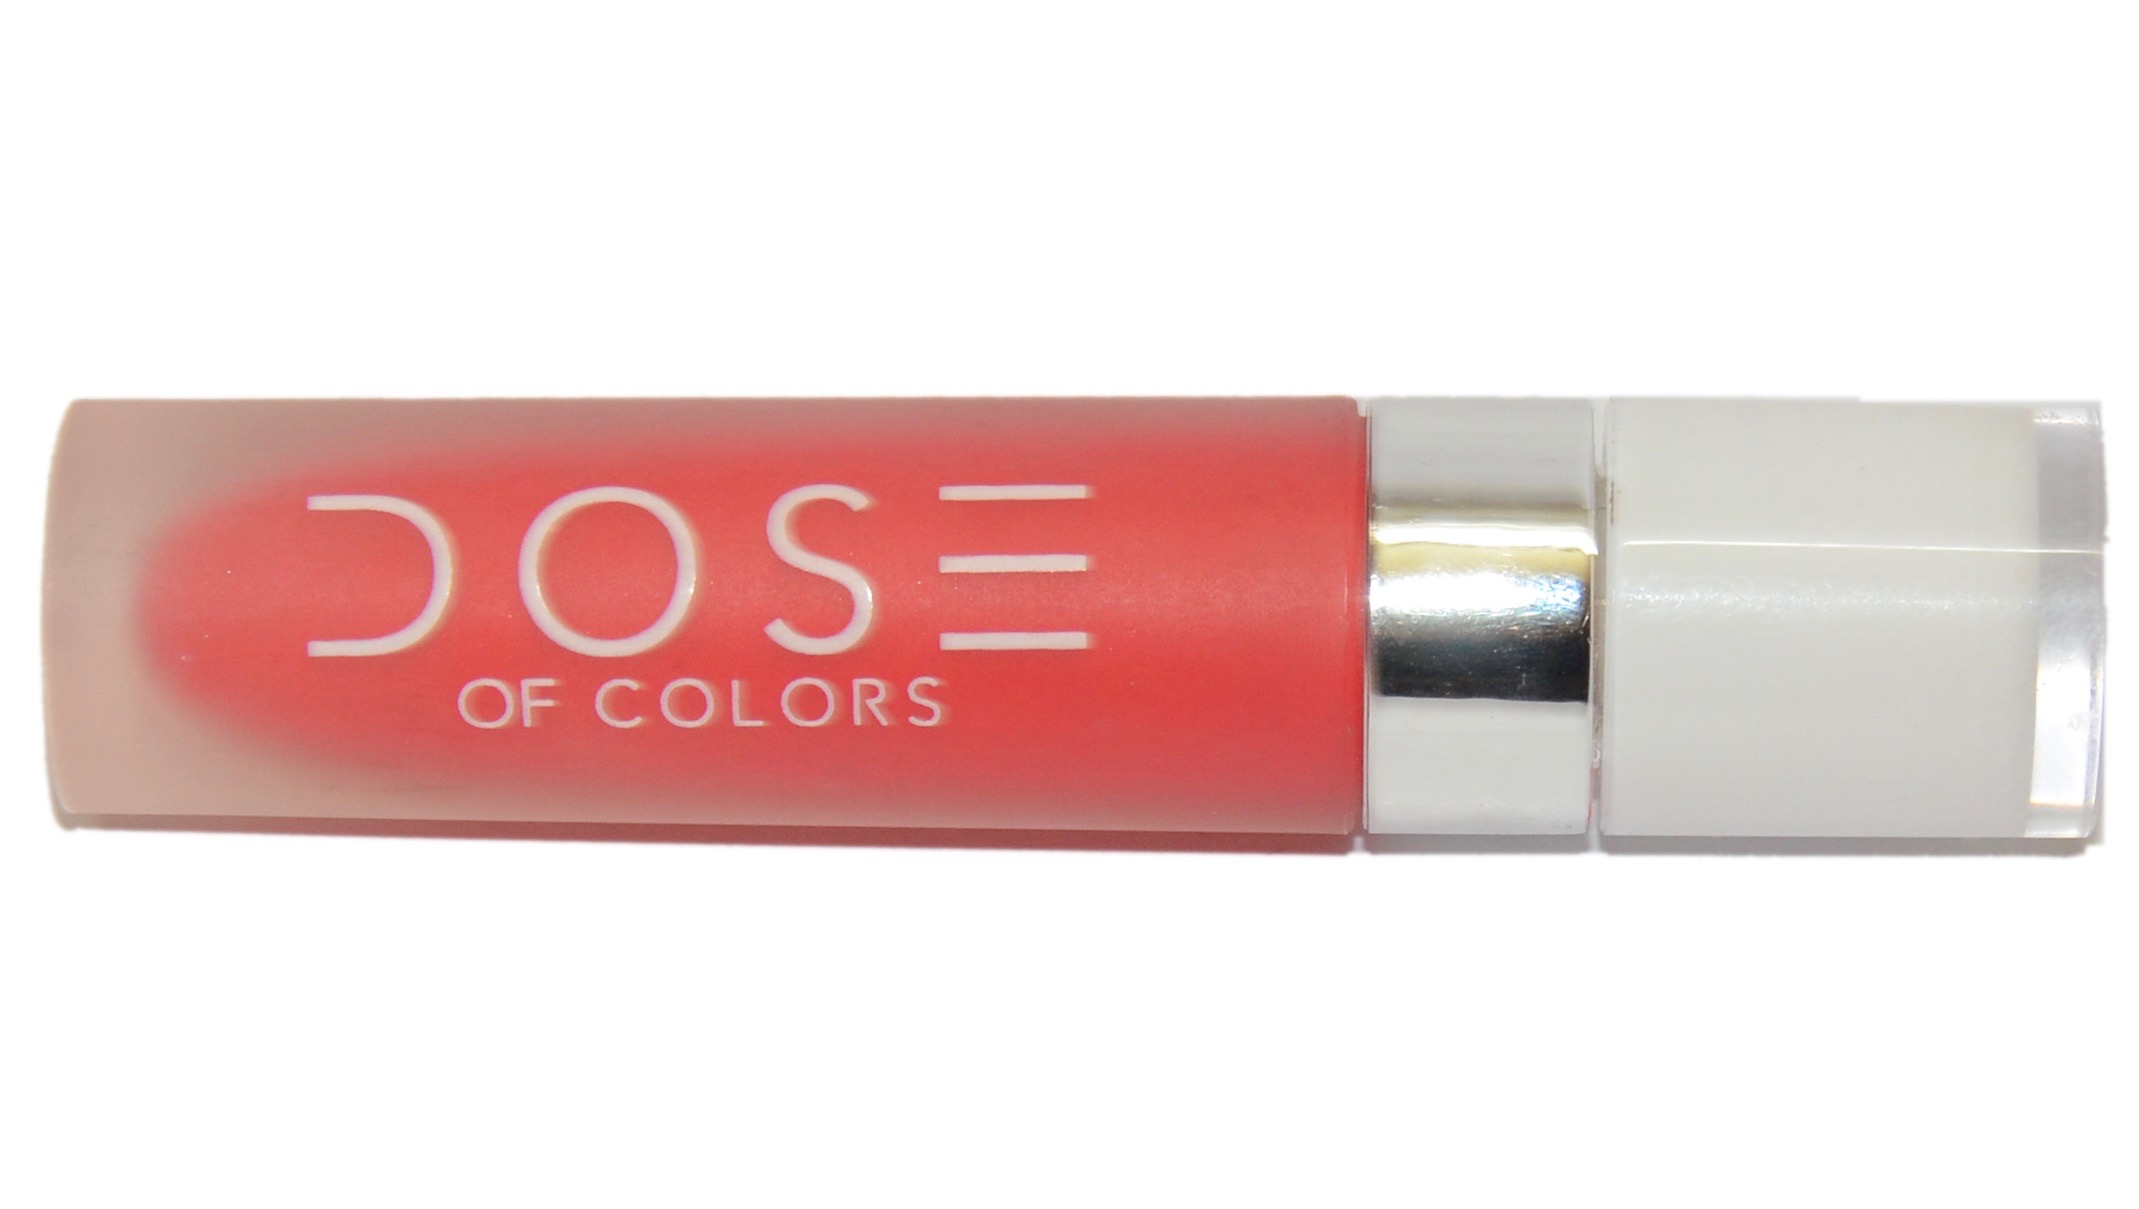 Dose Of Colors Matte Liquid Lipstick Coral Crush Review BEDECOR Free Coloring Picture wallpaper give a chance to color on the wall without getting in trouble! Fill the walls of your home or office with stress-relieving [bedroomdecorz.blogspot.com]